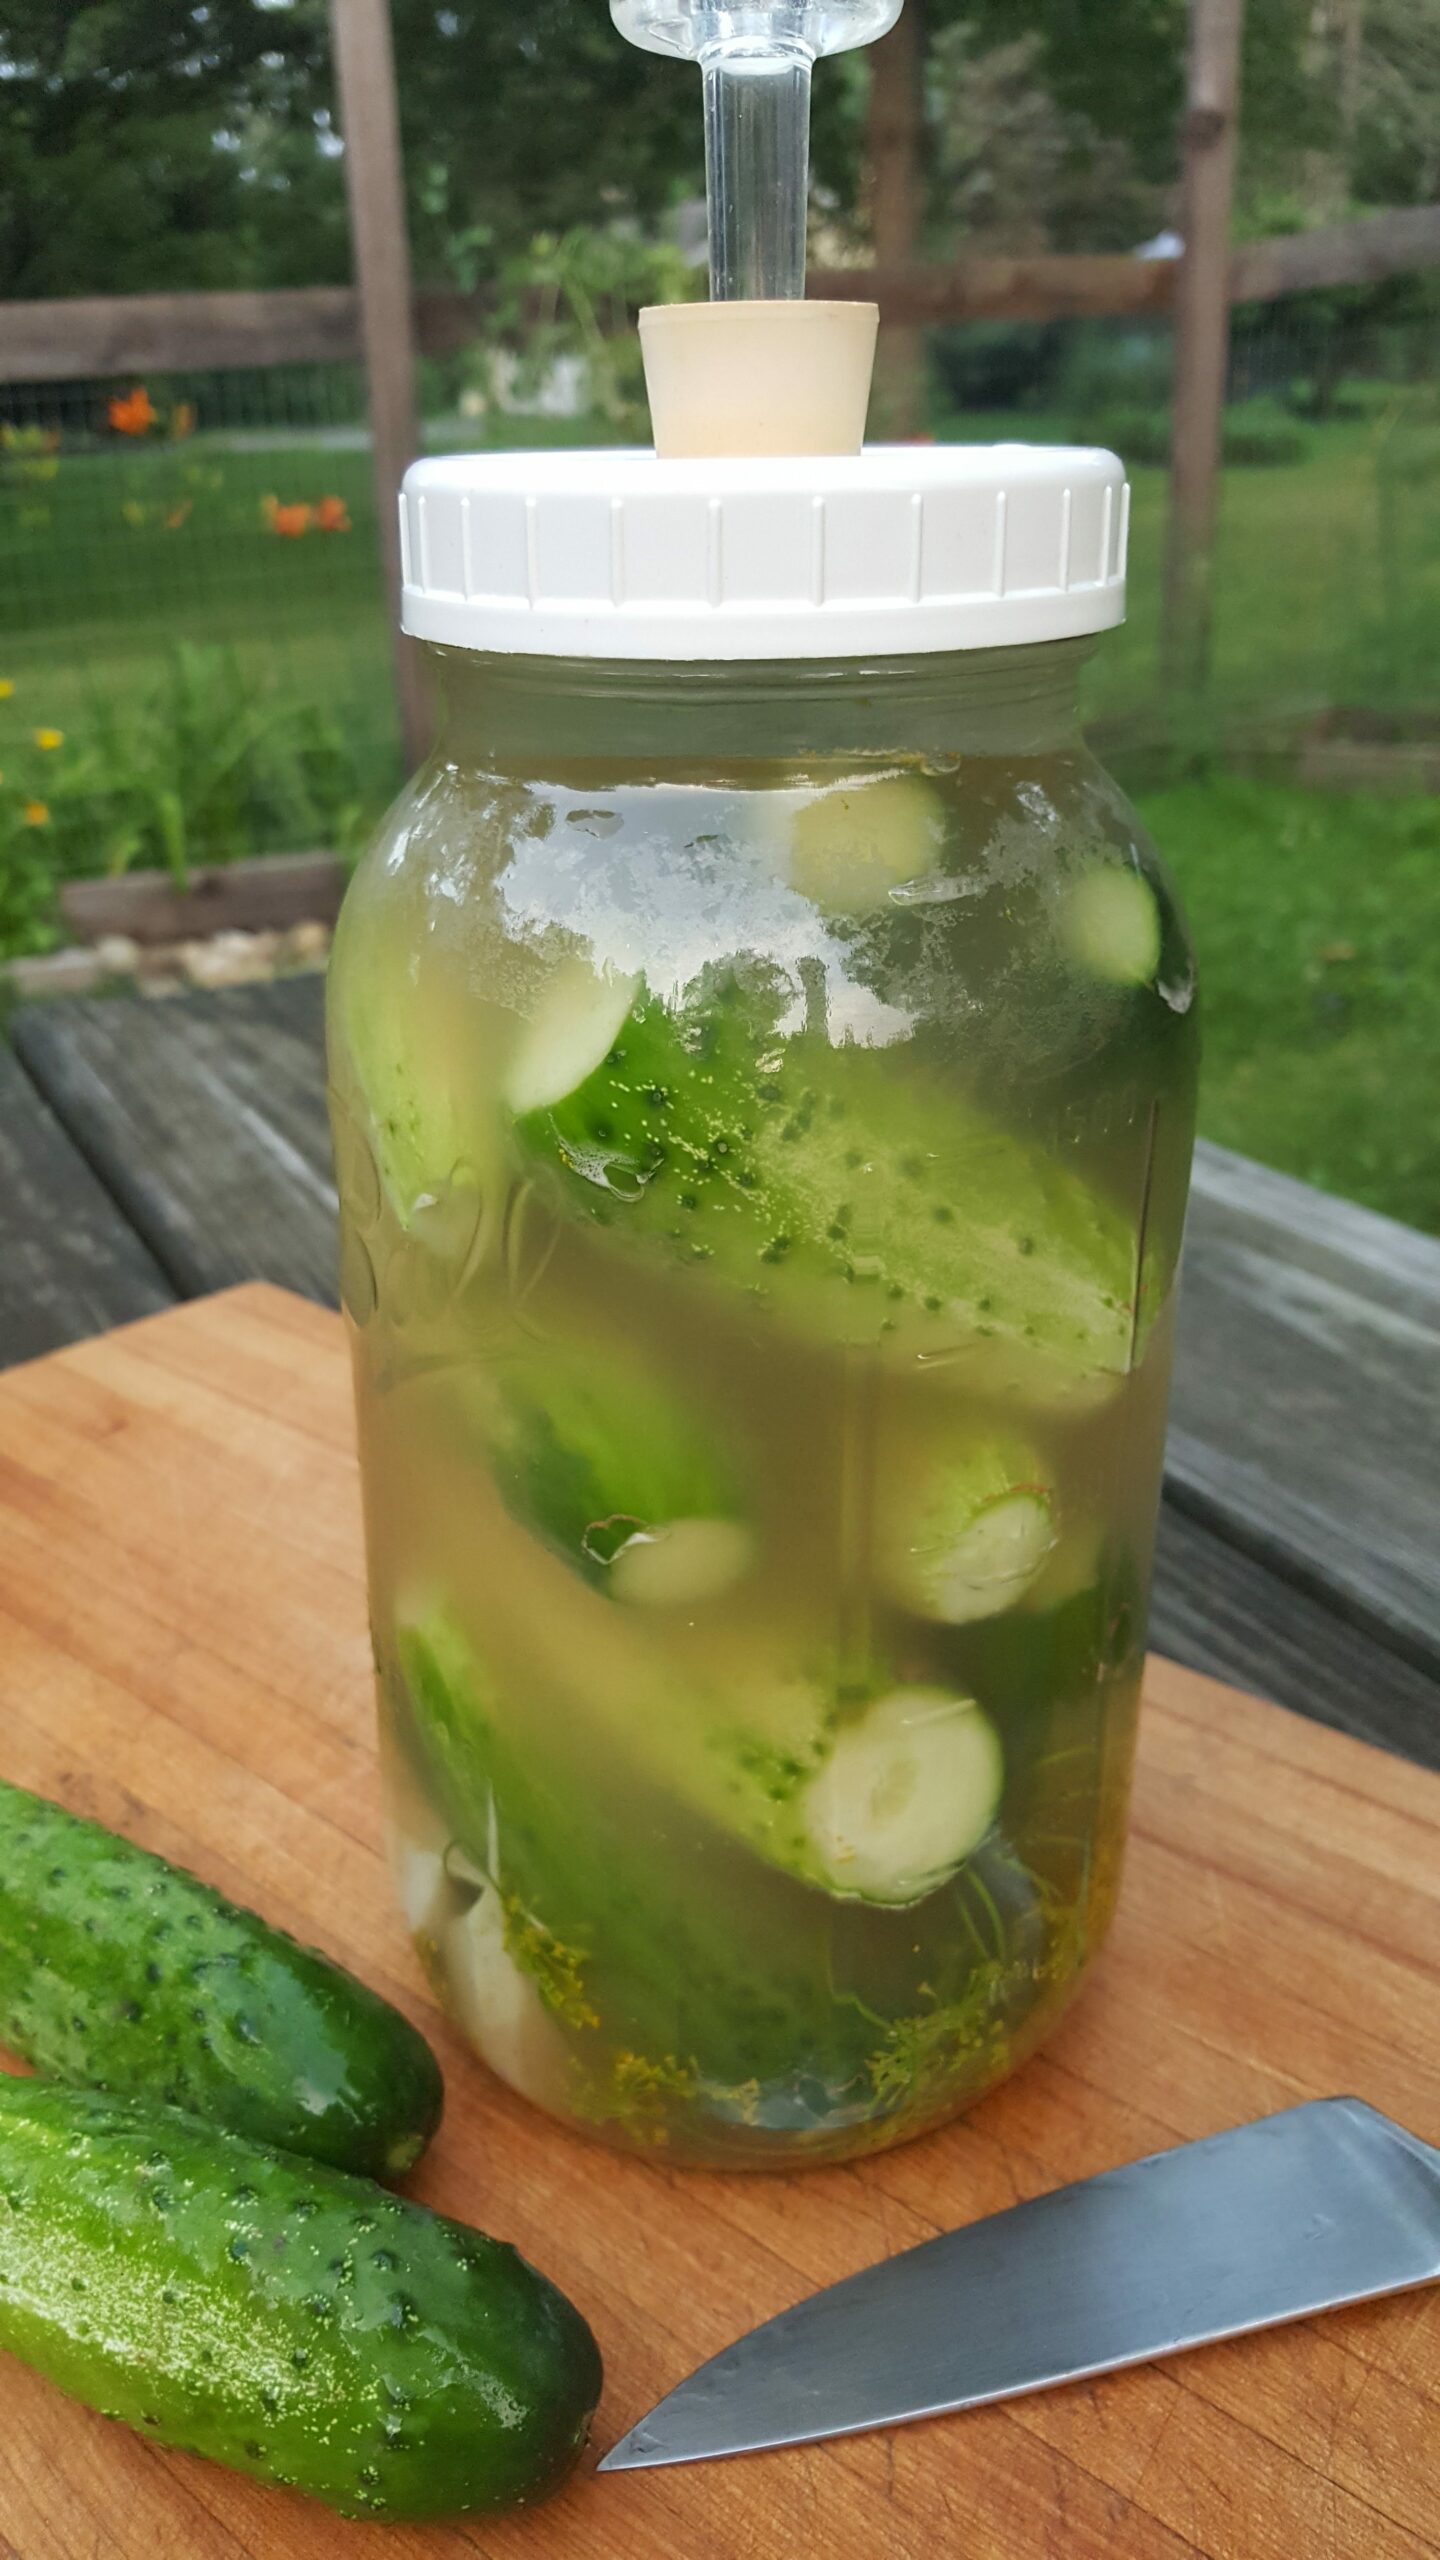 Lacto-Fermented Dill Pickles